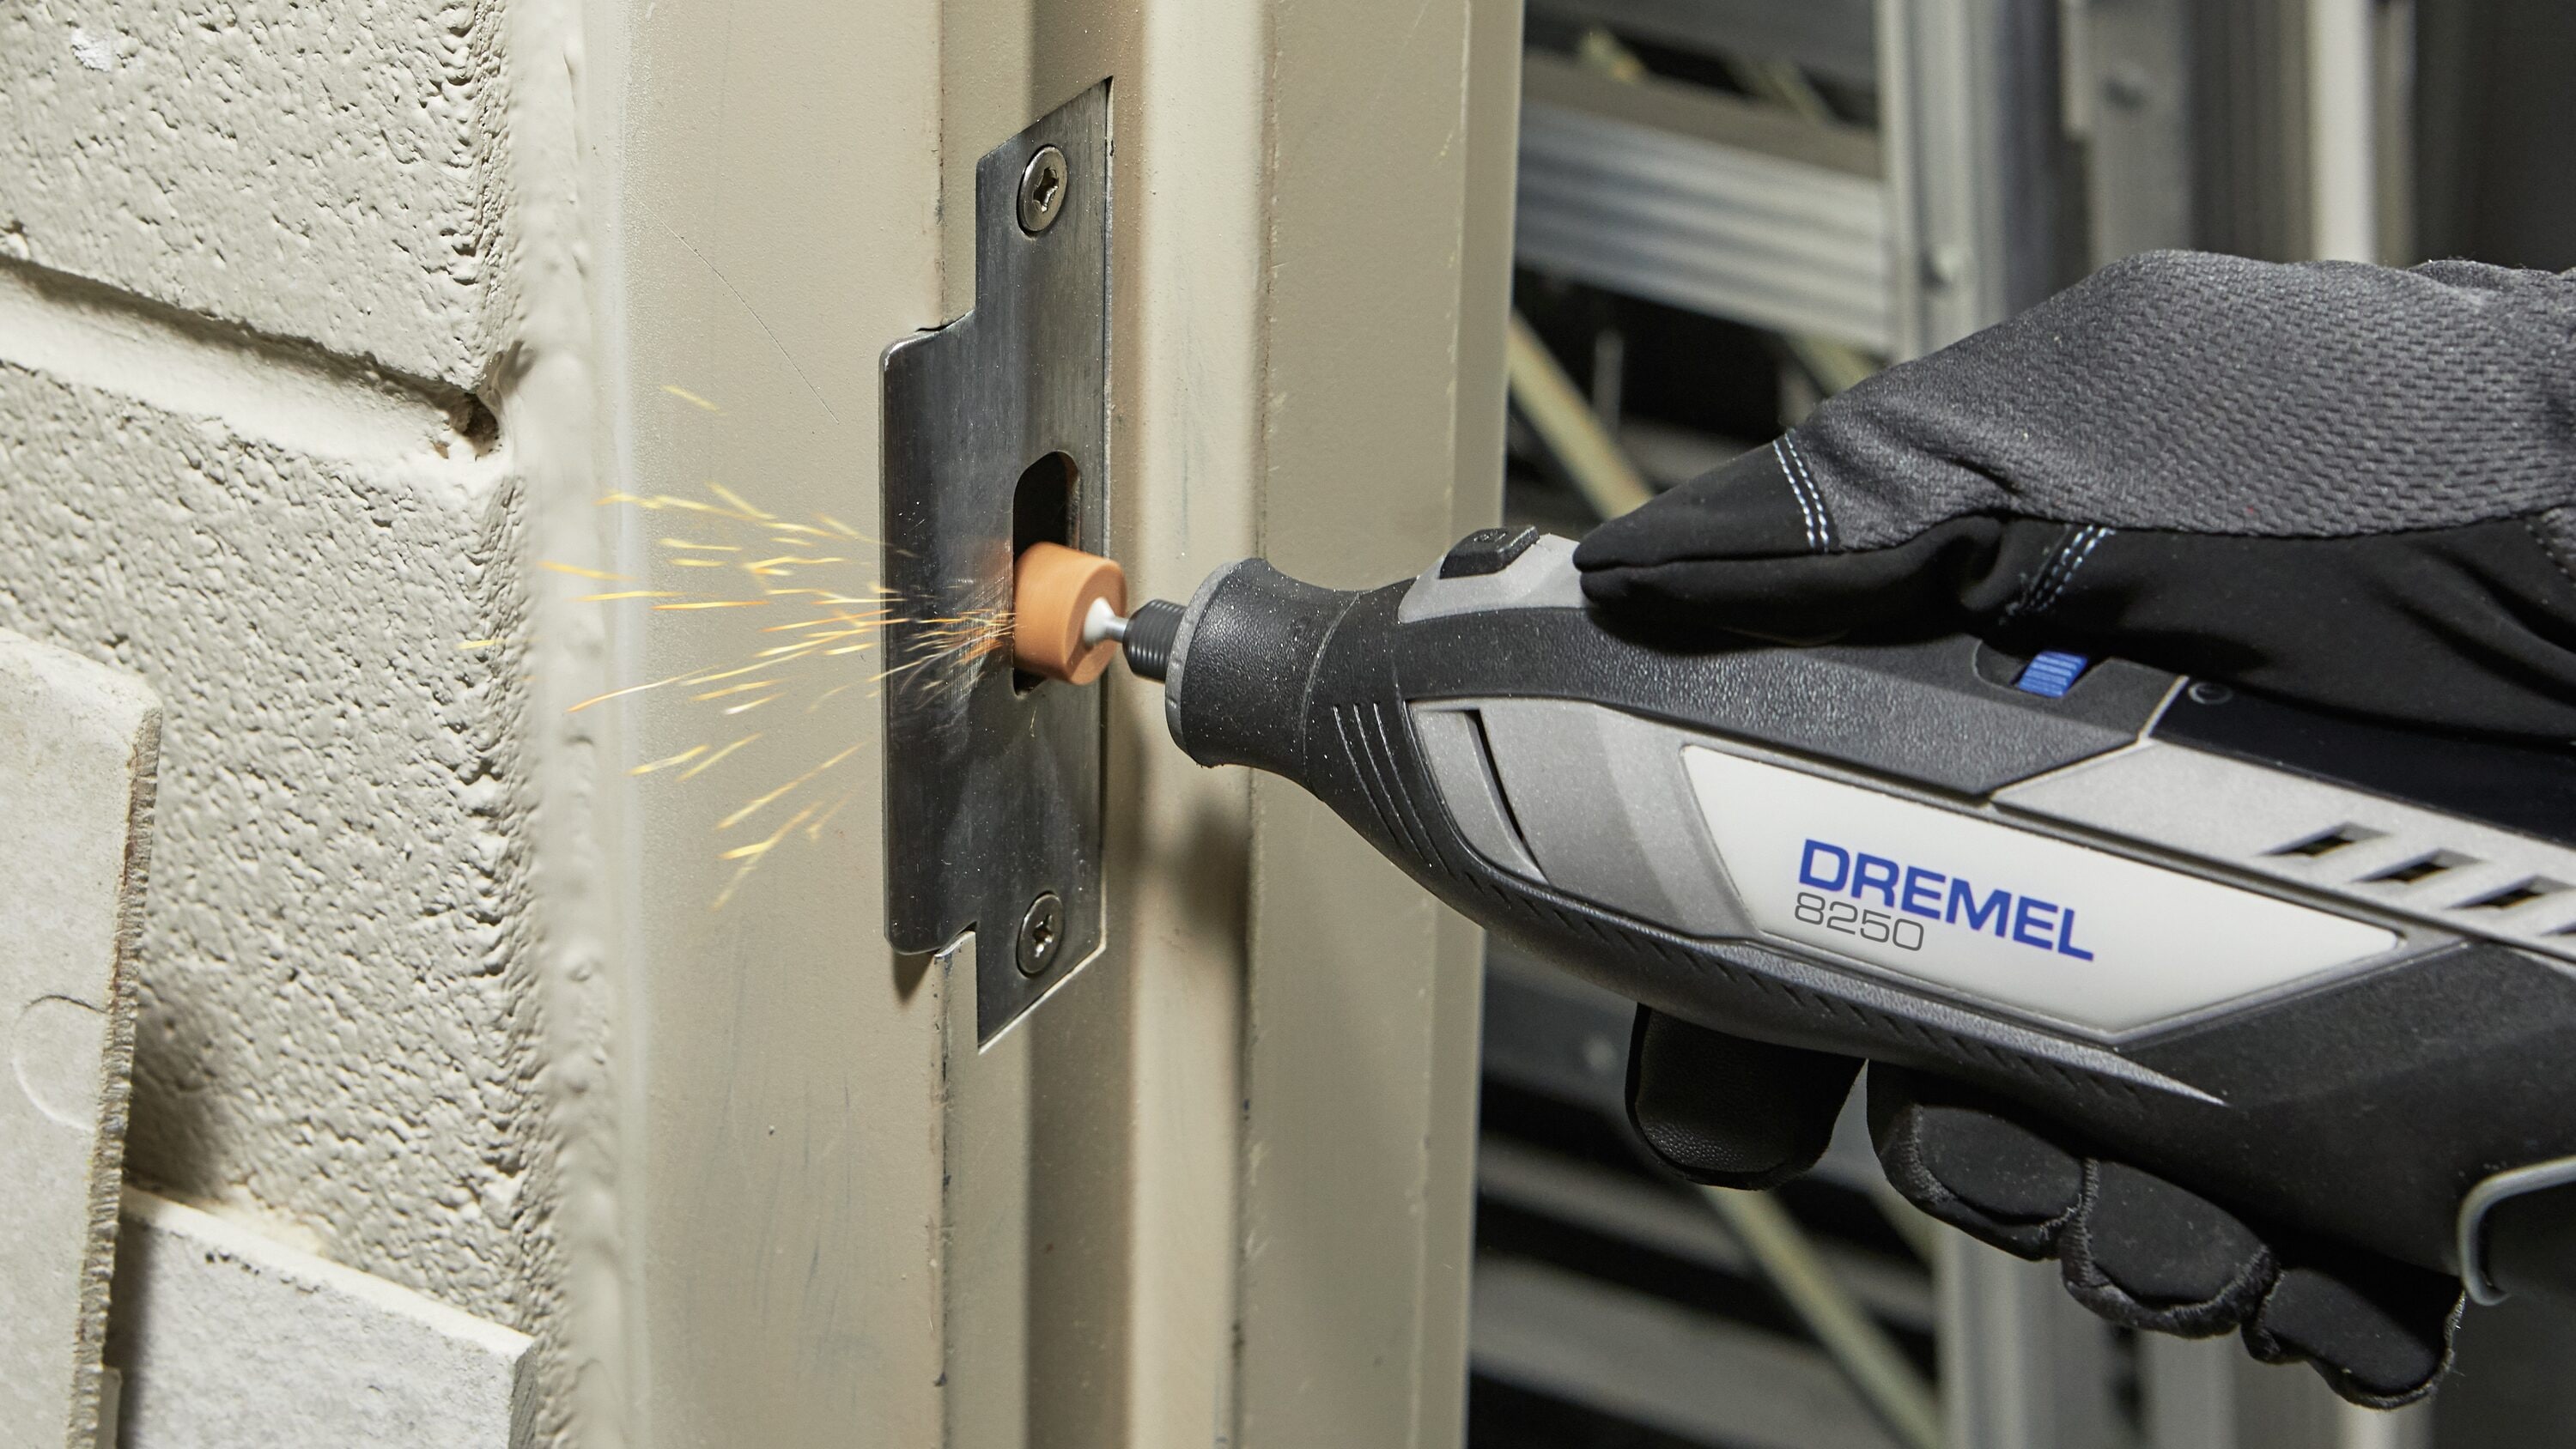 Review: Dremel 8250 cordless rotary tool - FineWoodworking